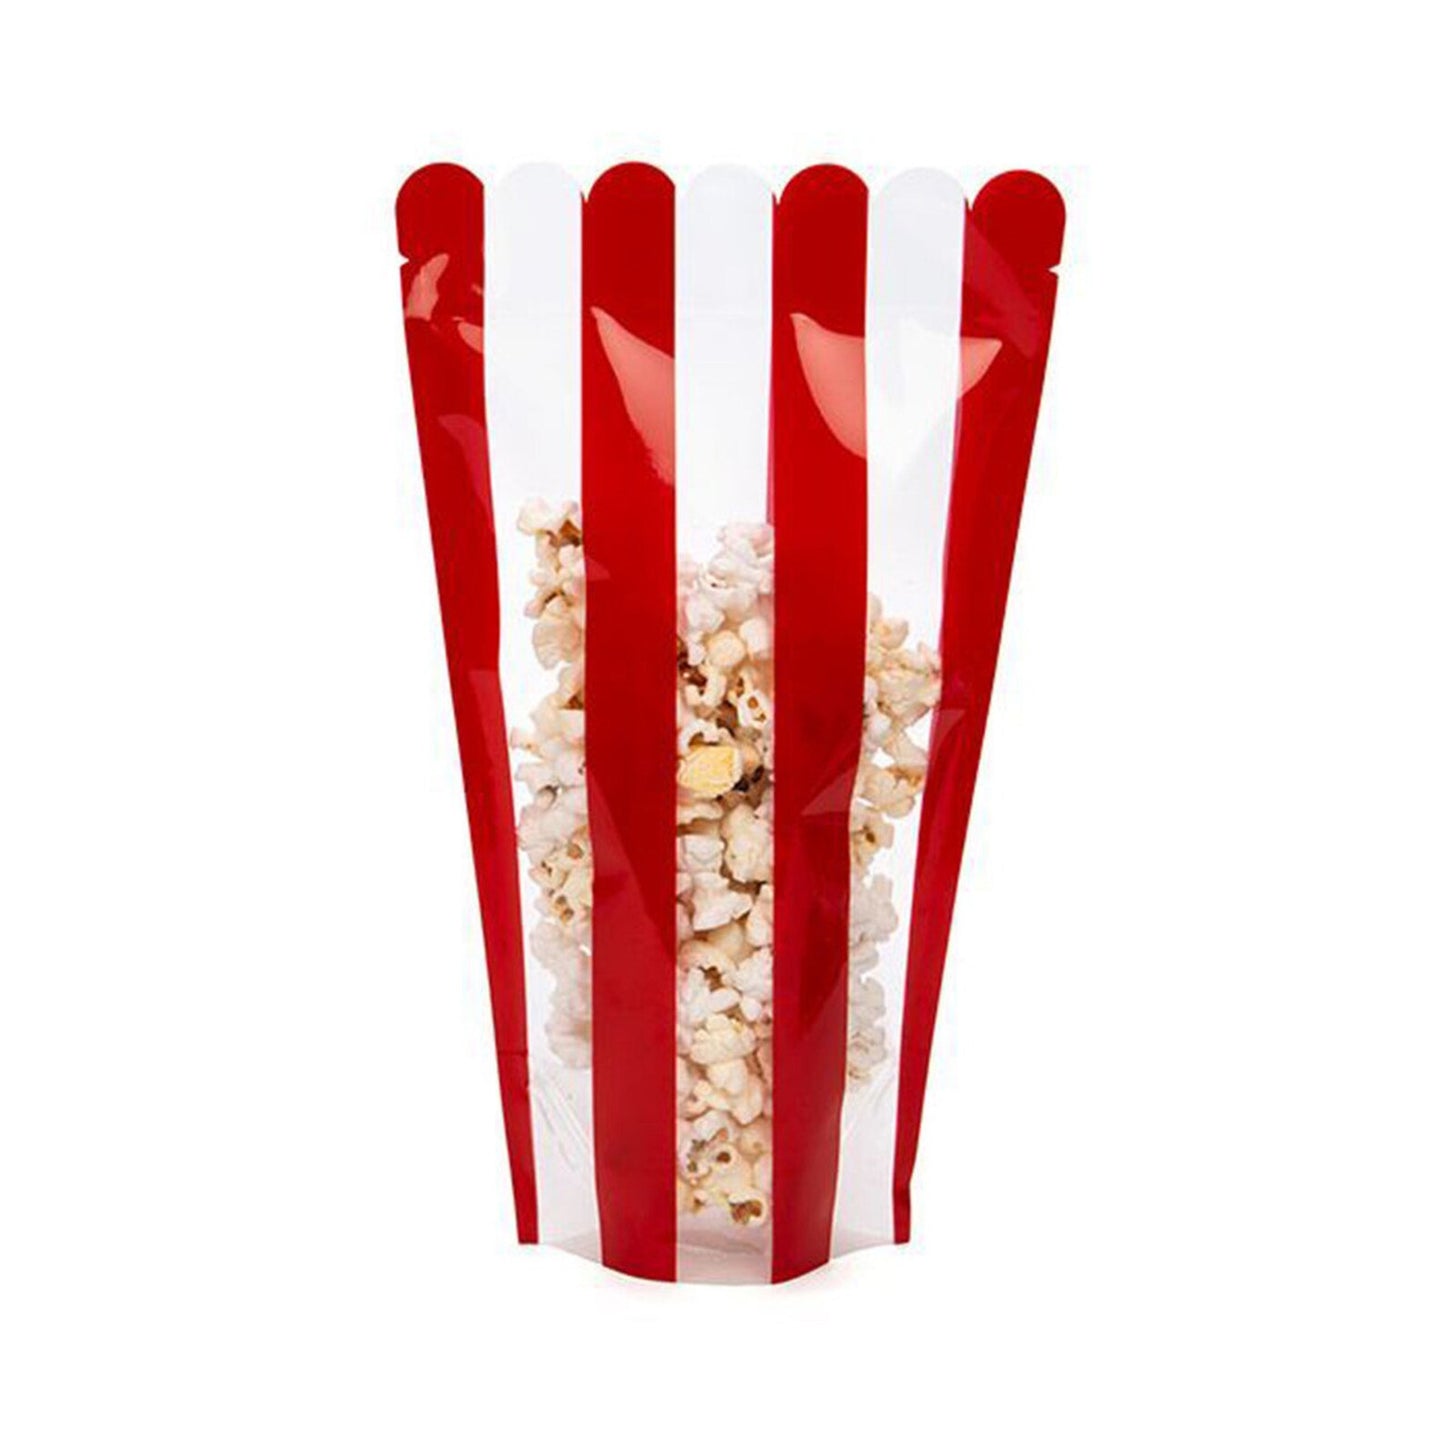 Popcorn loot bag 5 PACK | Food Themed Stand Up Pouches